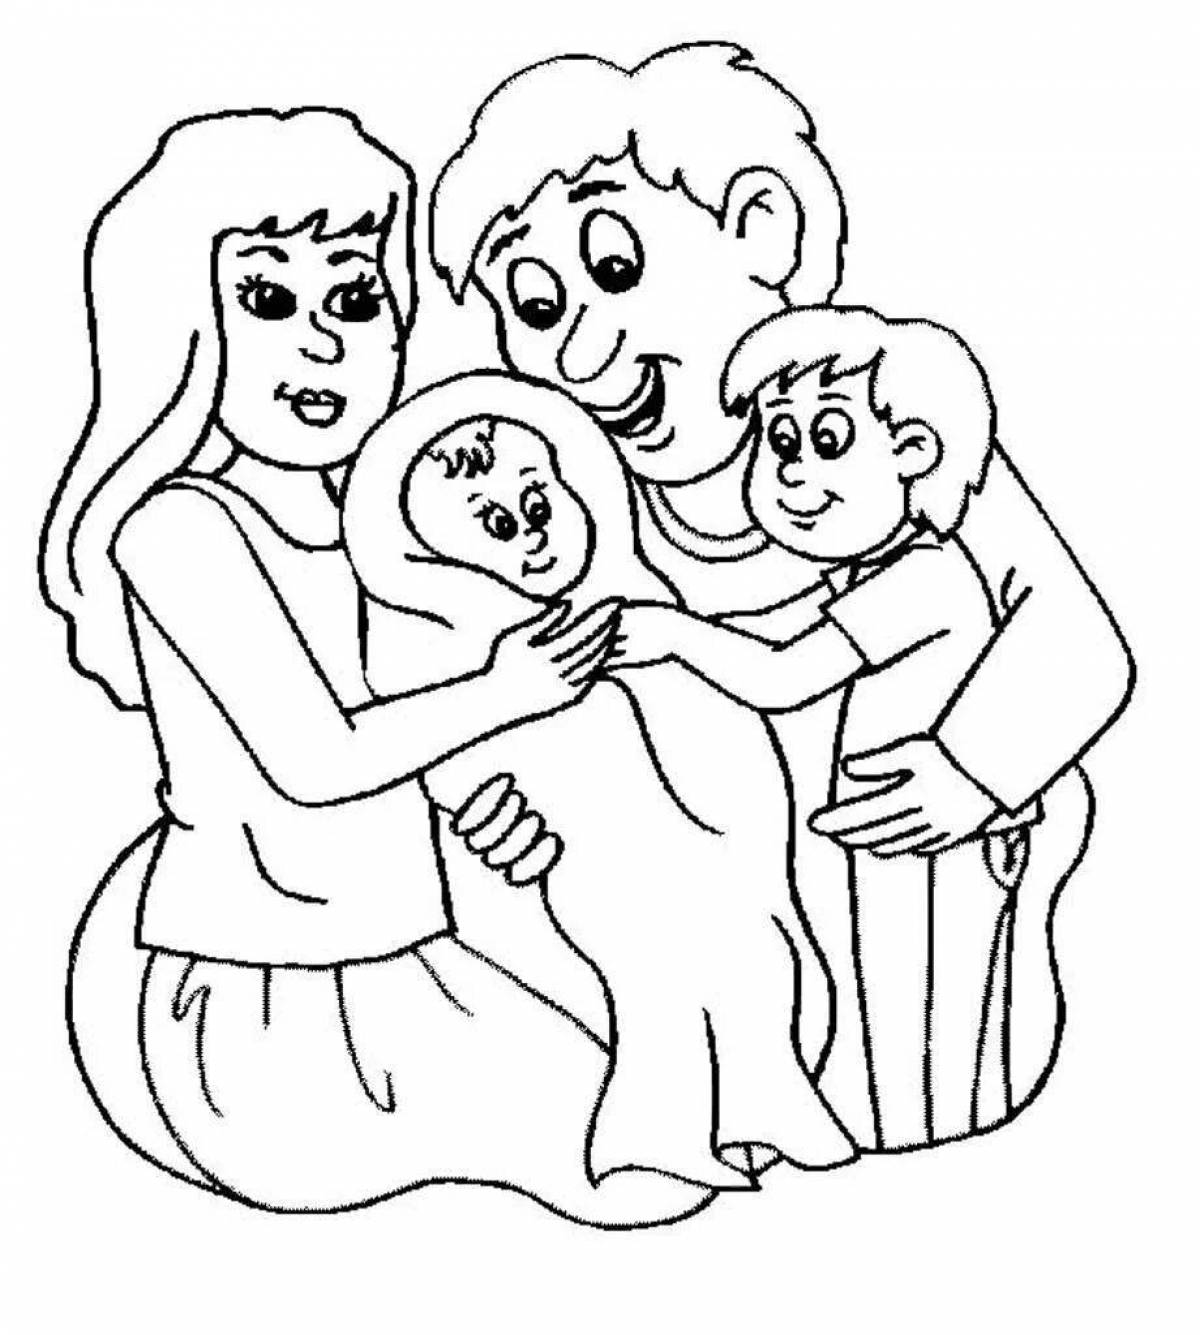 Coloring page satisfied family